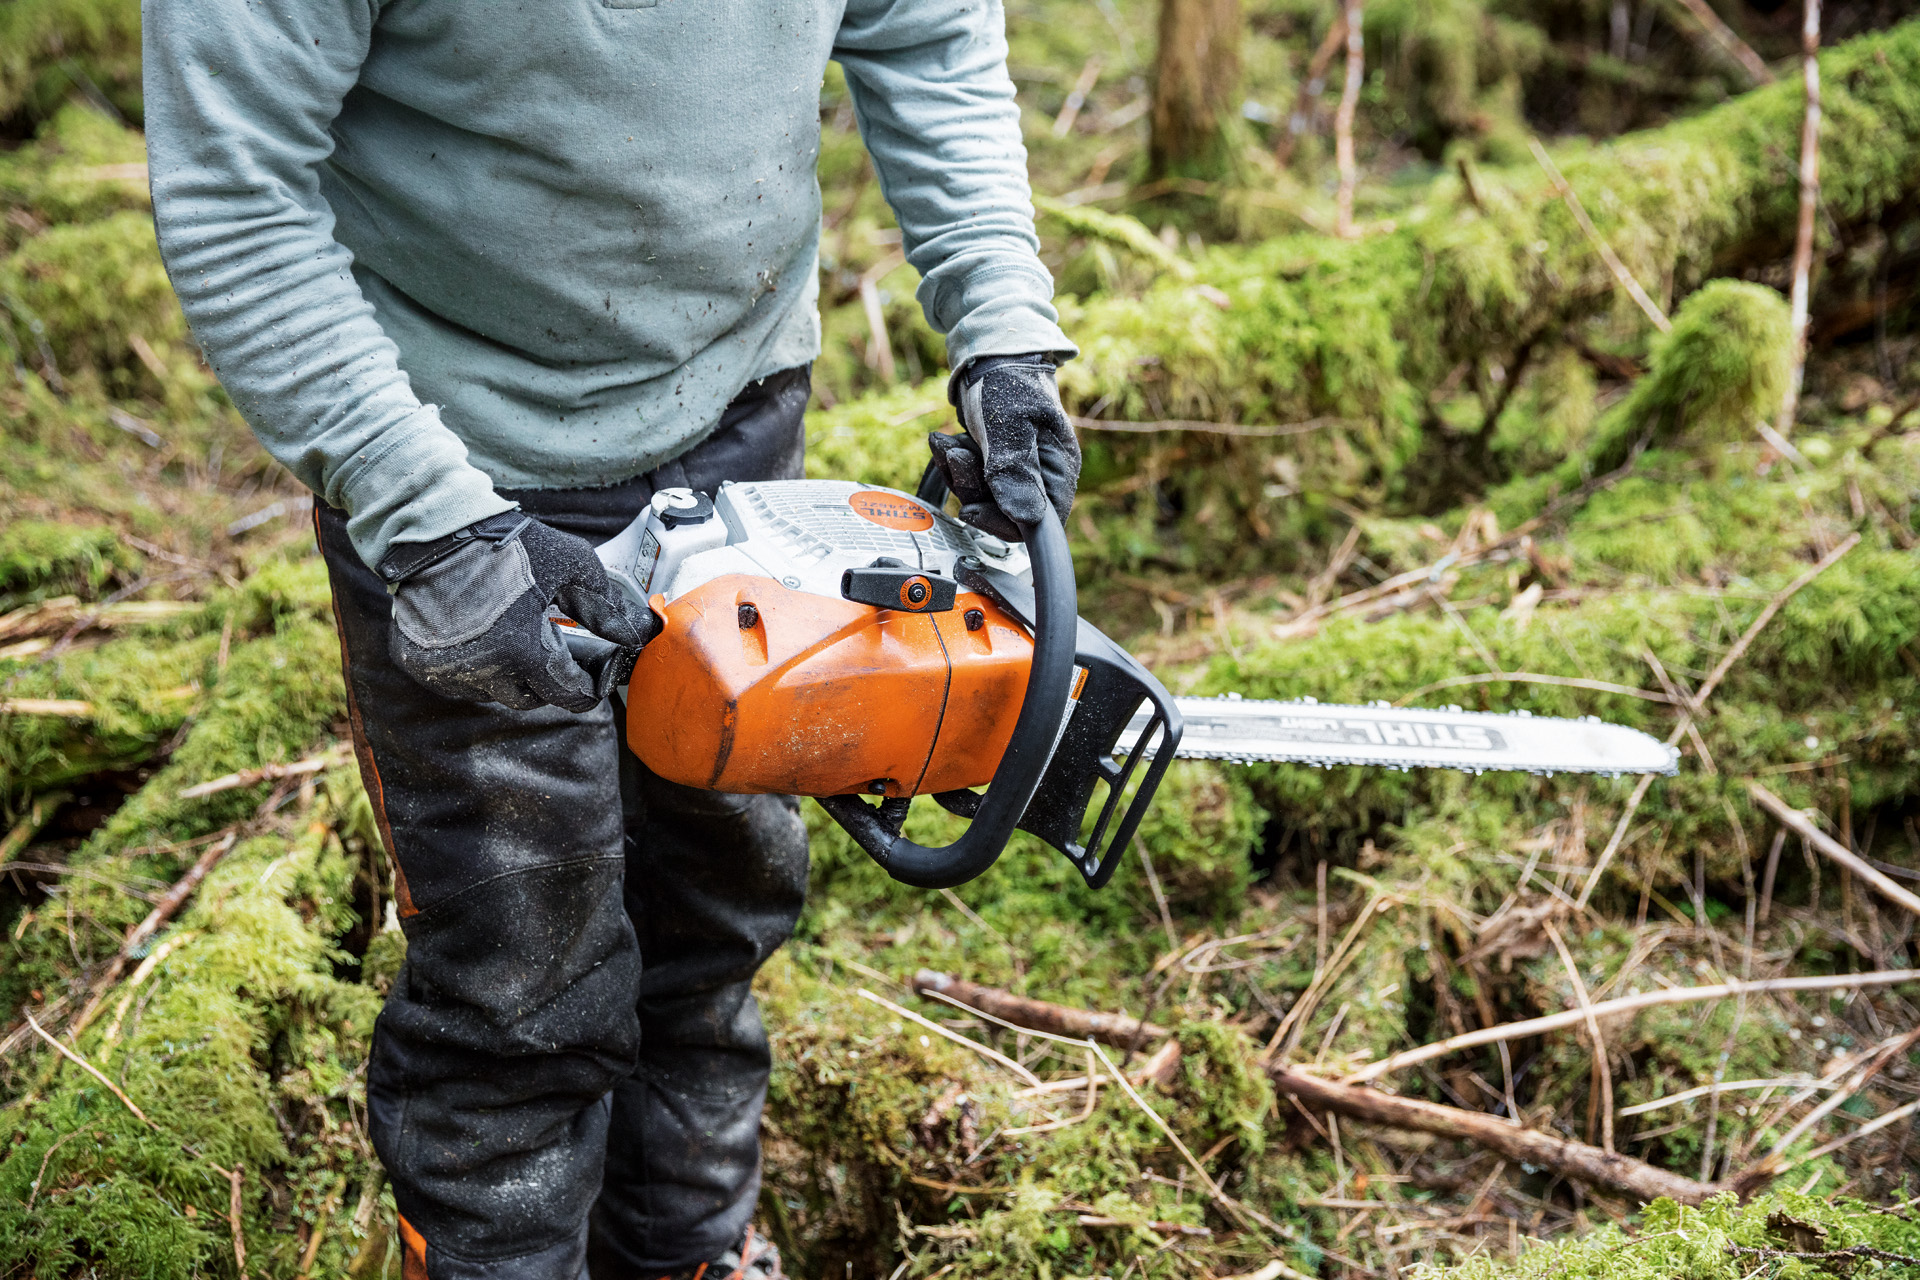 A STIHL MS 462 C-M petrol chainsaw with carburettor heater being carried among moss-covered tree trunks in a forest